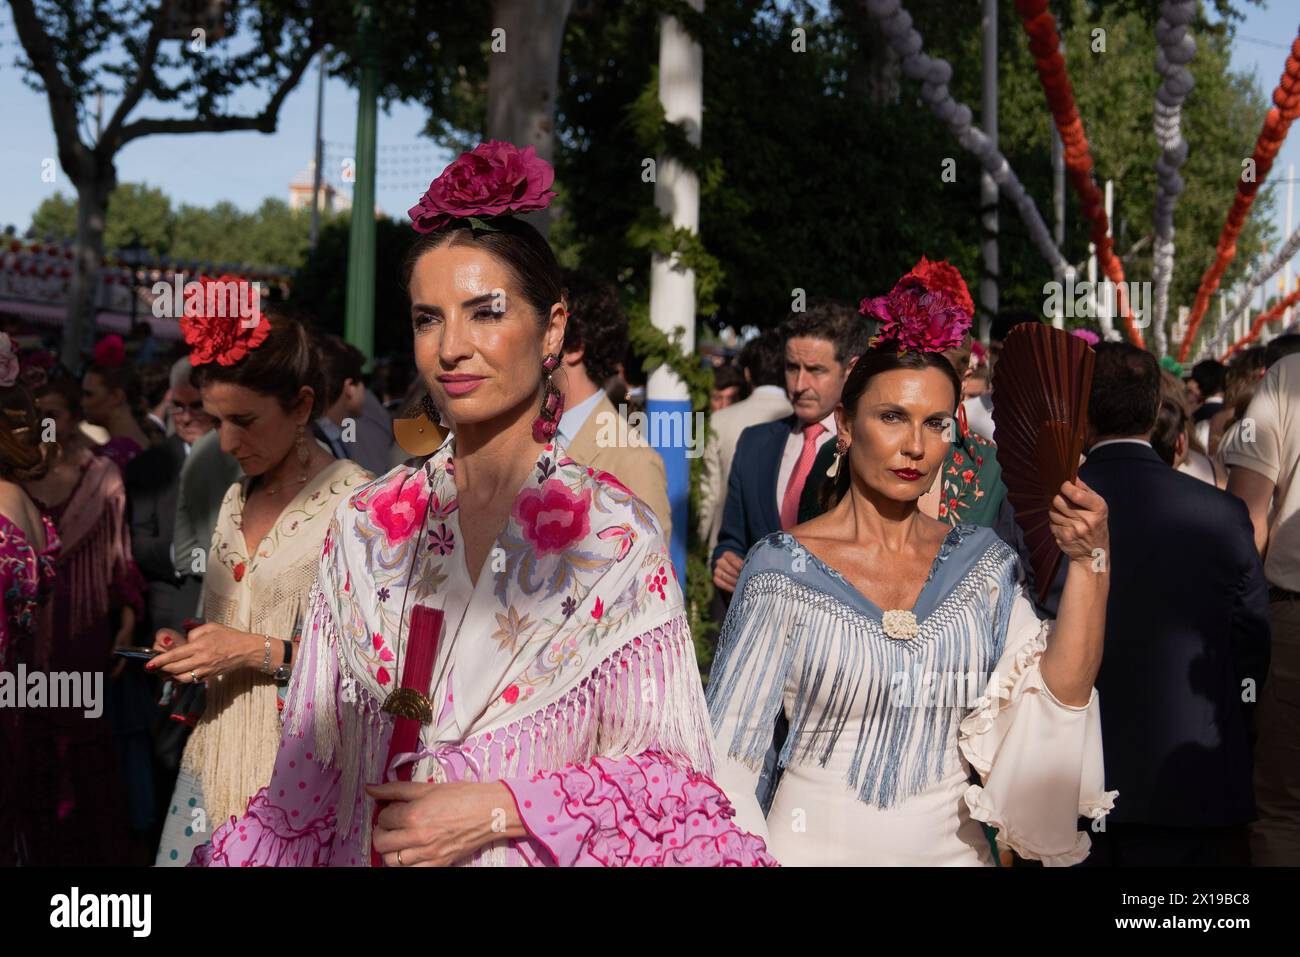 Women wearing the traditional flamenco dresses, often in bright colors, and accessorized with flowers in their hair are seen laughing during the fair. The April Fair is one of the most international and popular festivals in Seville. Created in 1847 as a livestock fair, over time the festive aspect of the event ended up taking over the commercial part, until it became an essential event for Sevillians. For a week, more than a thousand booths installed in the fairgrounds became the second home of the inhabitants of this city, a space where they can share and have fun in company until the early h Stock Photo